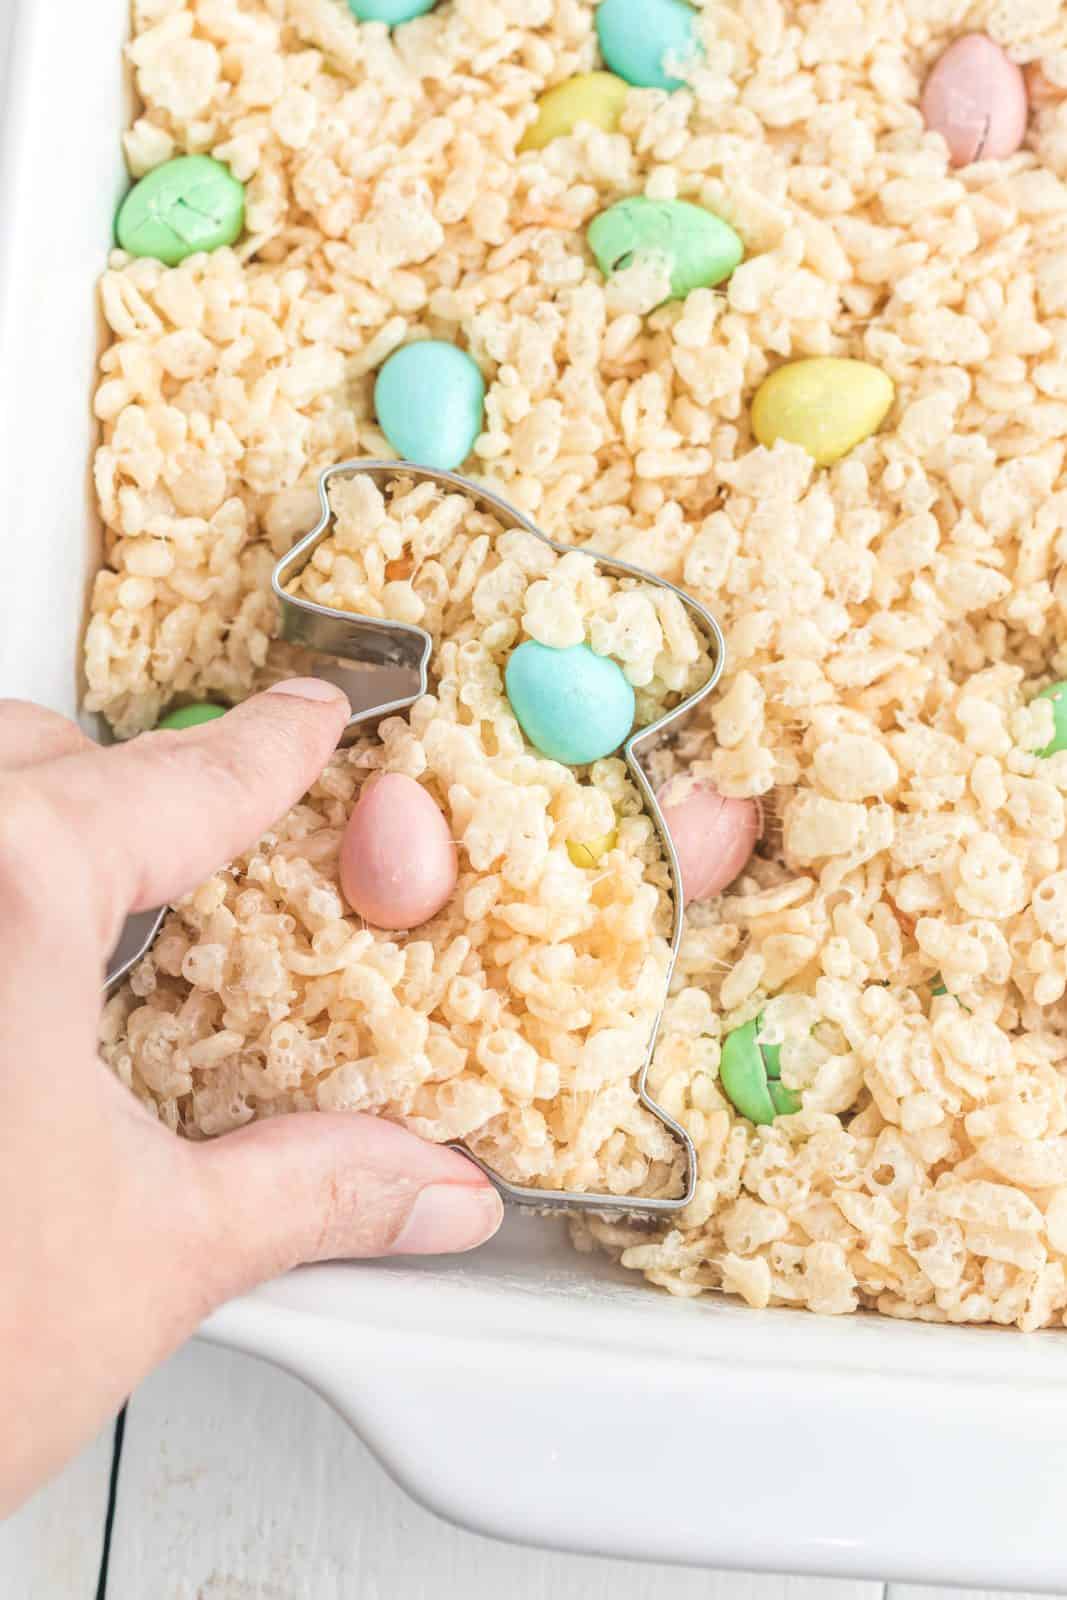 Hand cutting out bunny shapes out of finished Rice Krispies Treats.